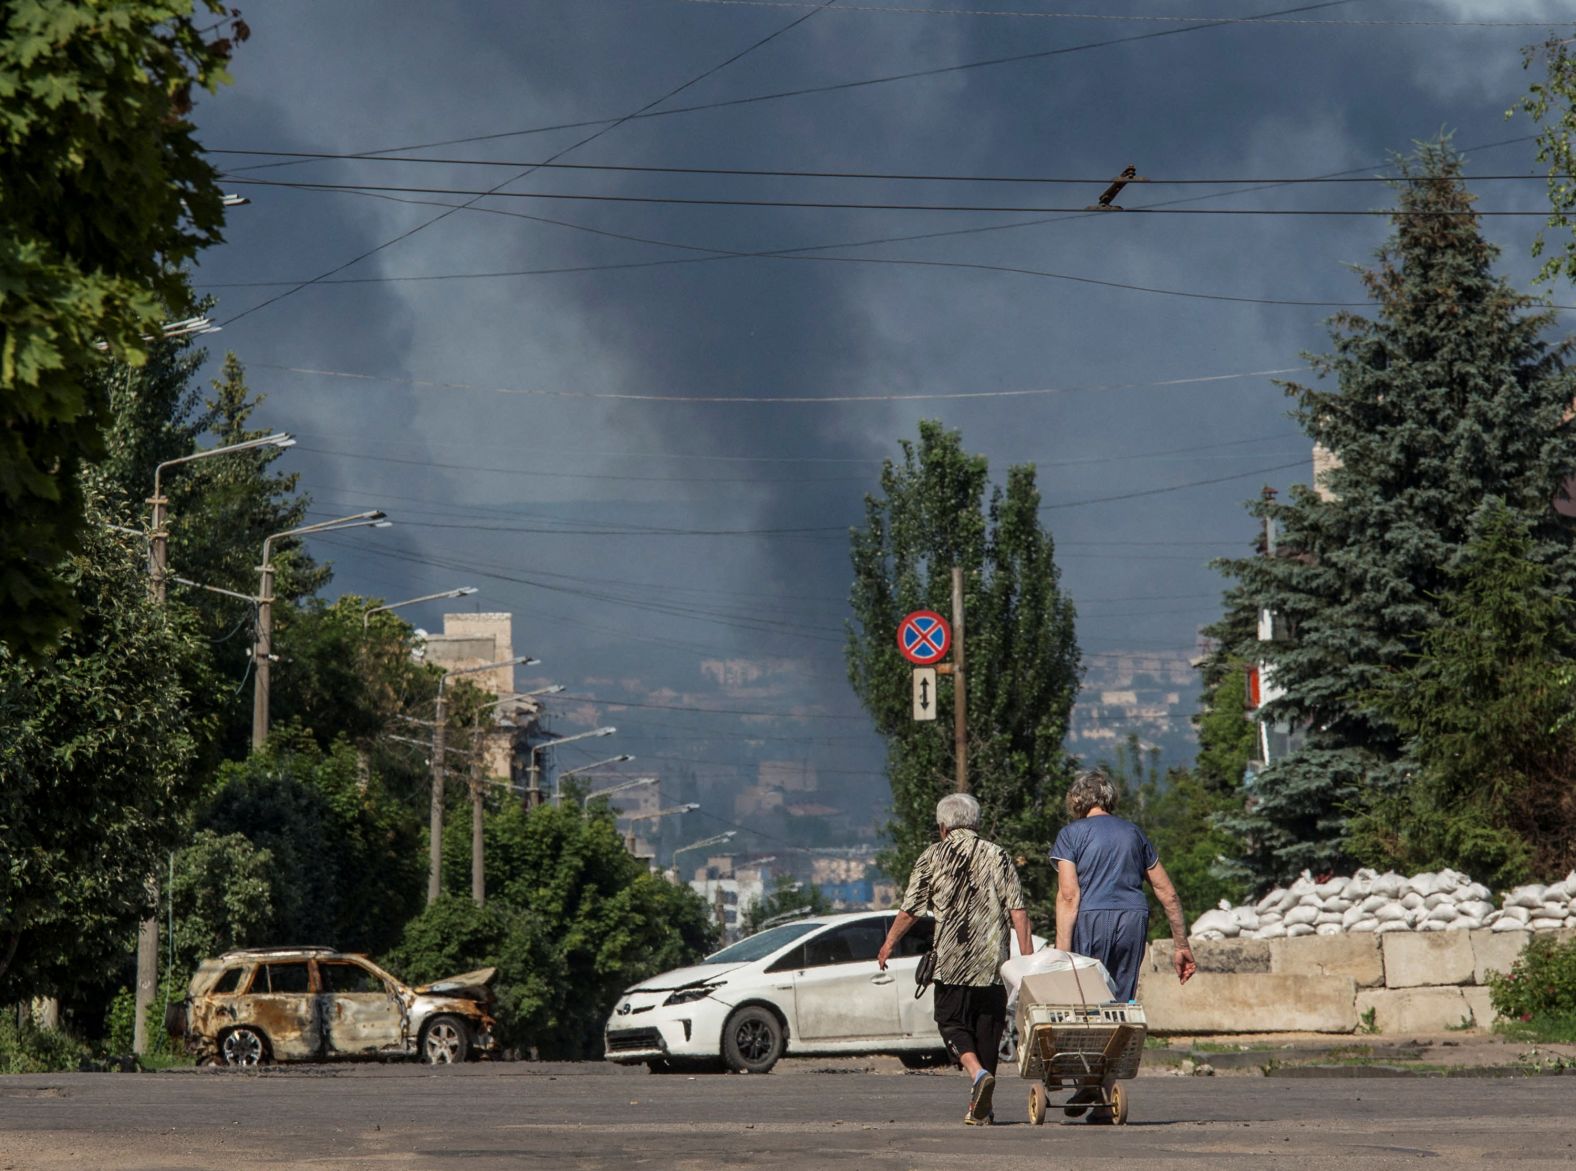 Local residents walk along an empty street as smoke rises in the background in the town of Lysychansk, Ukraine, on June 10.